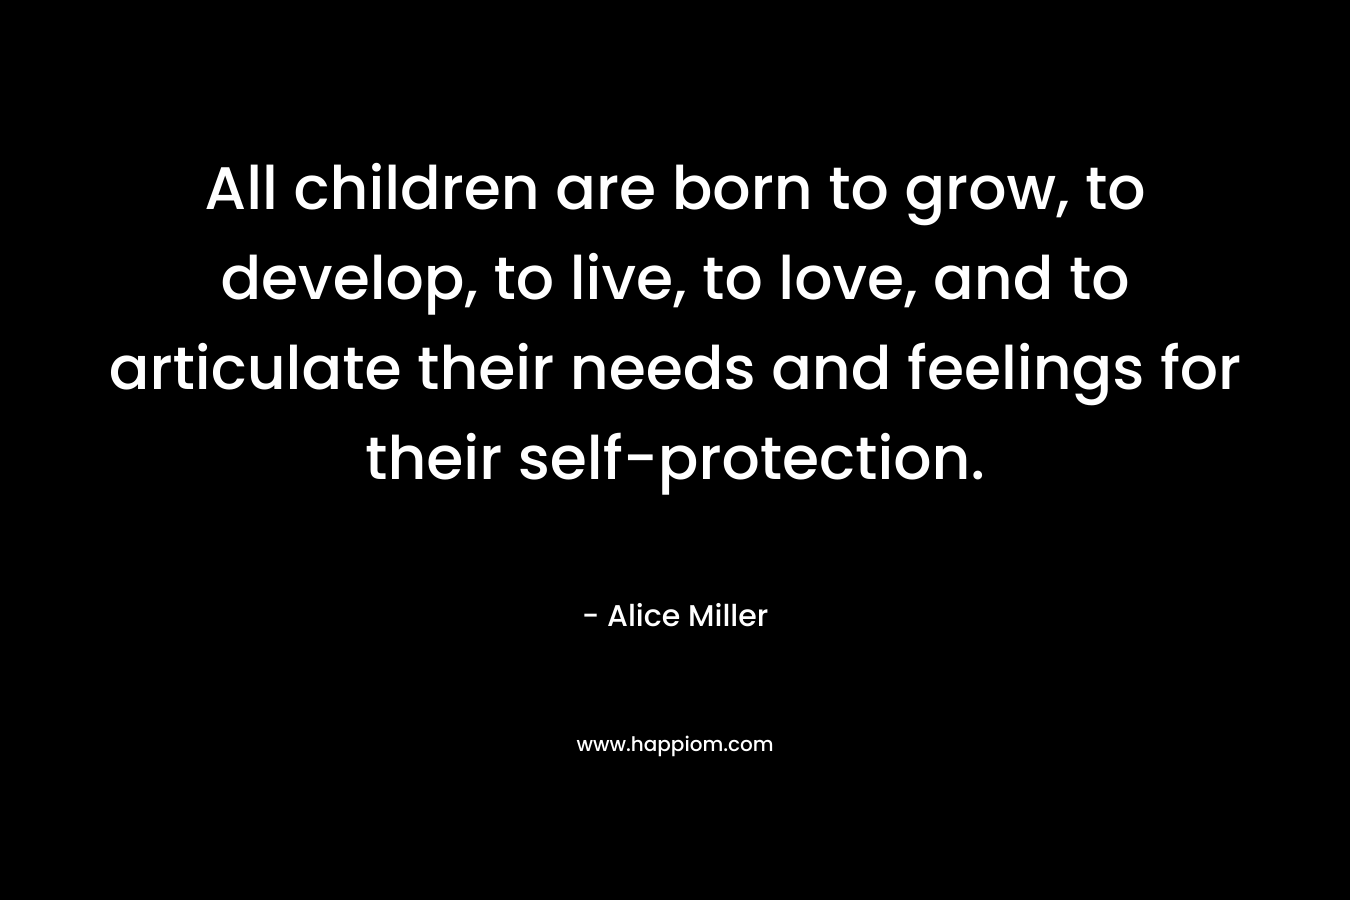 All children are born to grow, to develop, to live, to love, and to articulate their needs and feelings for their self-protection. – Alice  Miller